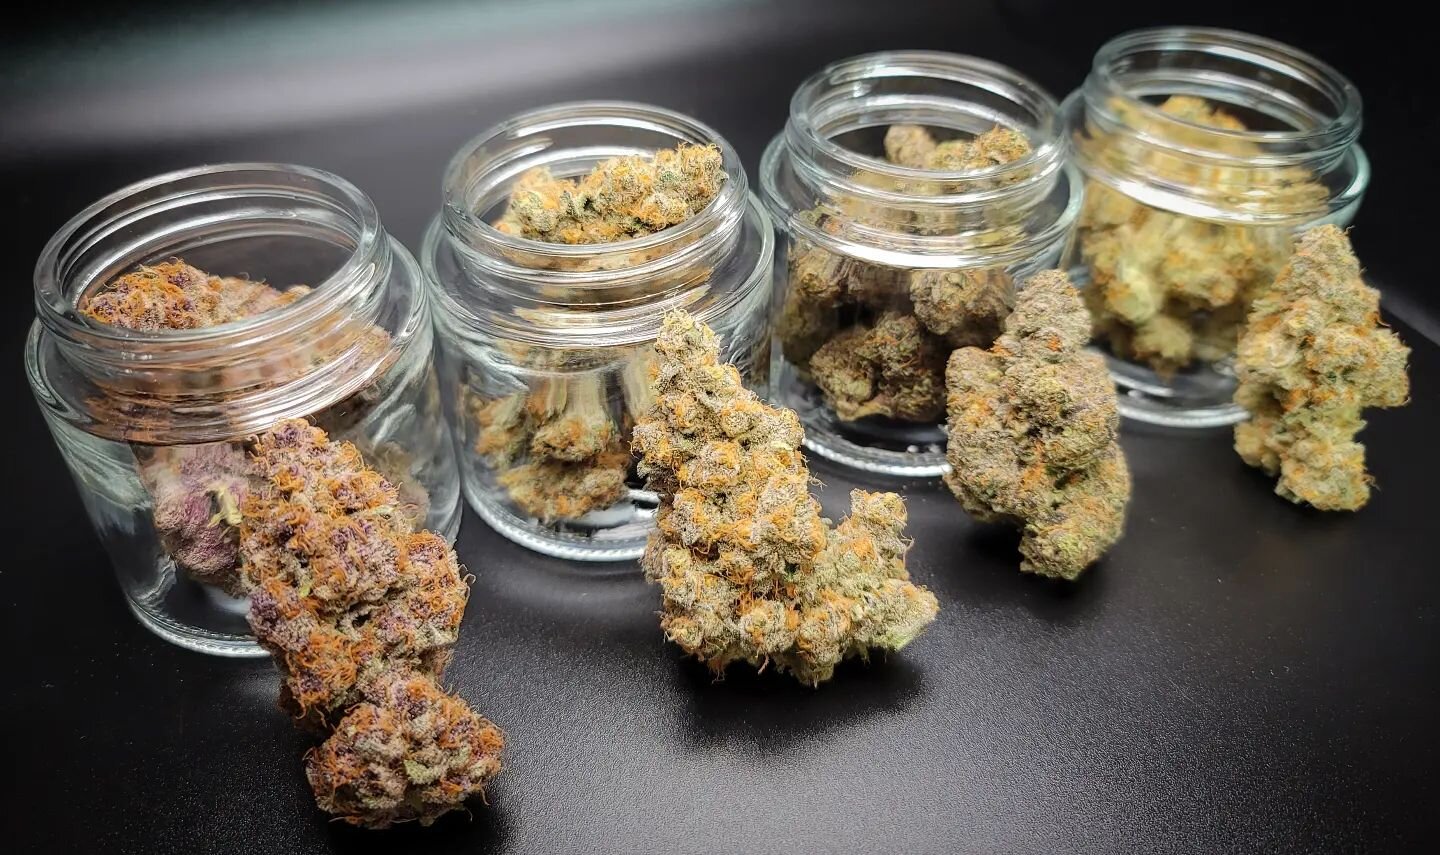 Flight of eighths! ✈️💨
.
We understand it can be hard to choose sometimes, our Flight gives you variety! Check out our Weedmaps page for more information!
.
This Flight contains our 4 newest strains:
Tropicana Cherry 🧃🍒
SuperBoof 🍊
Sherb Cake 🍨?